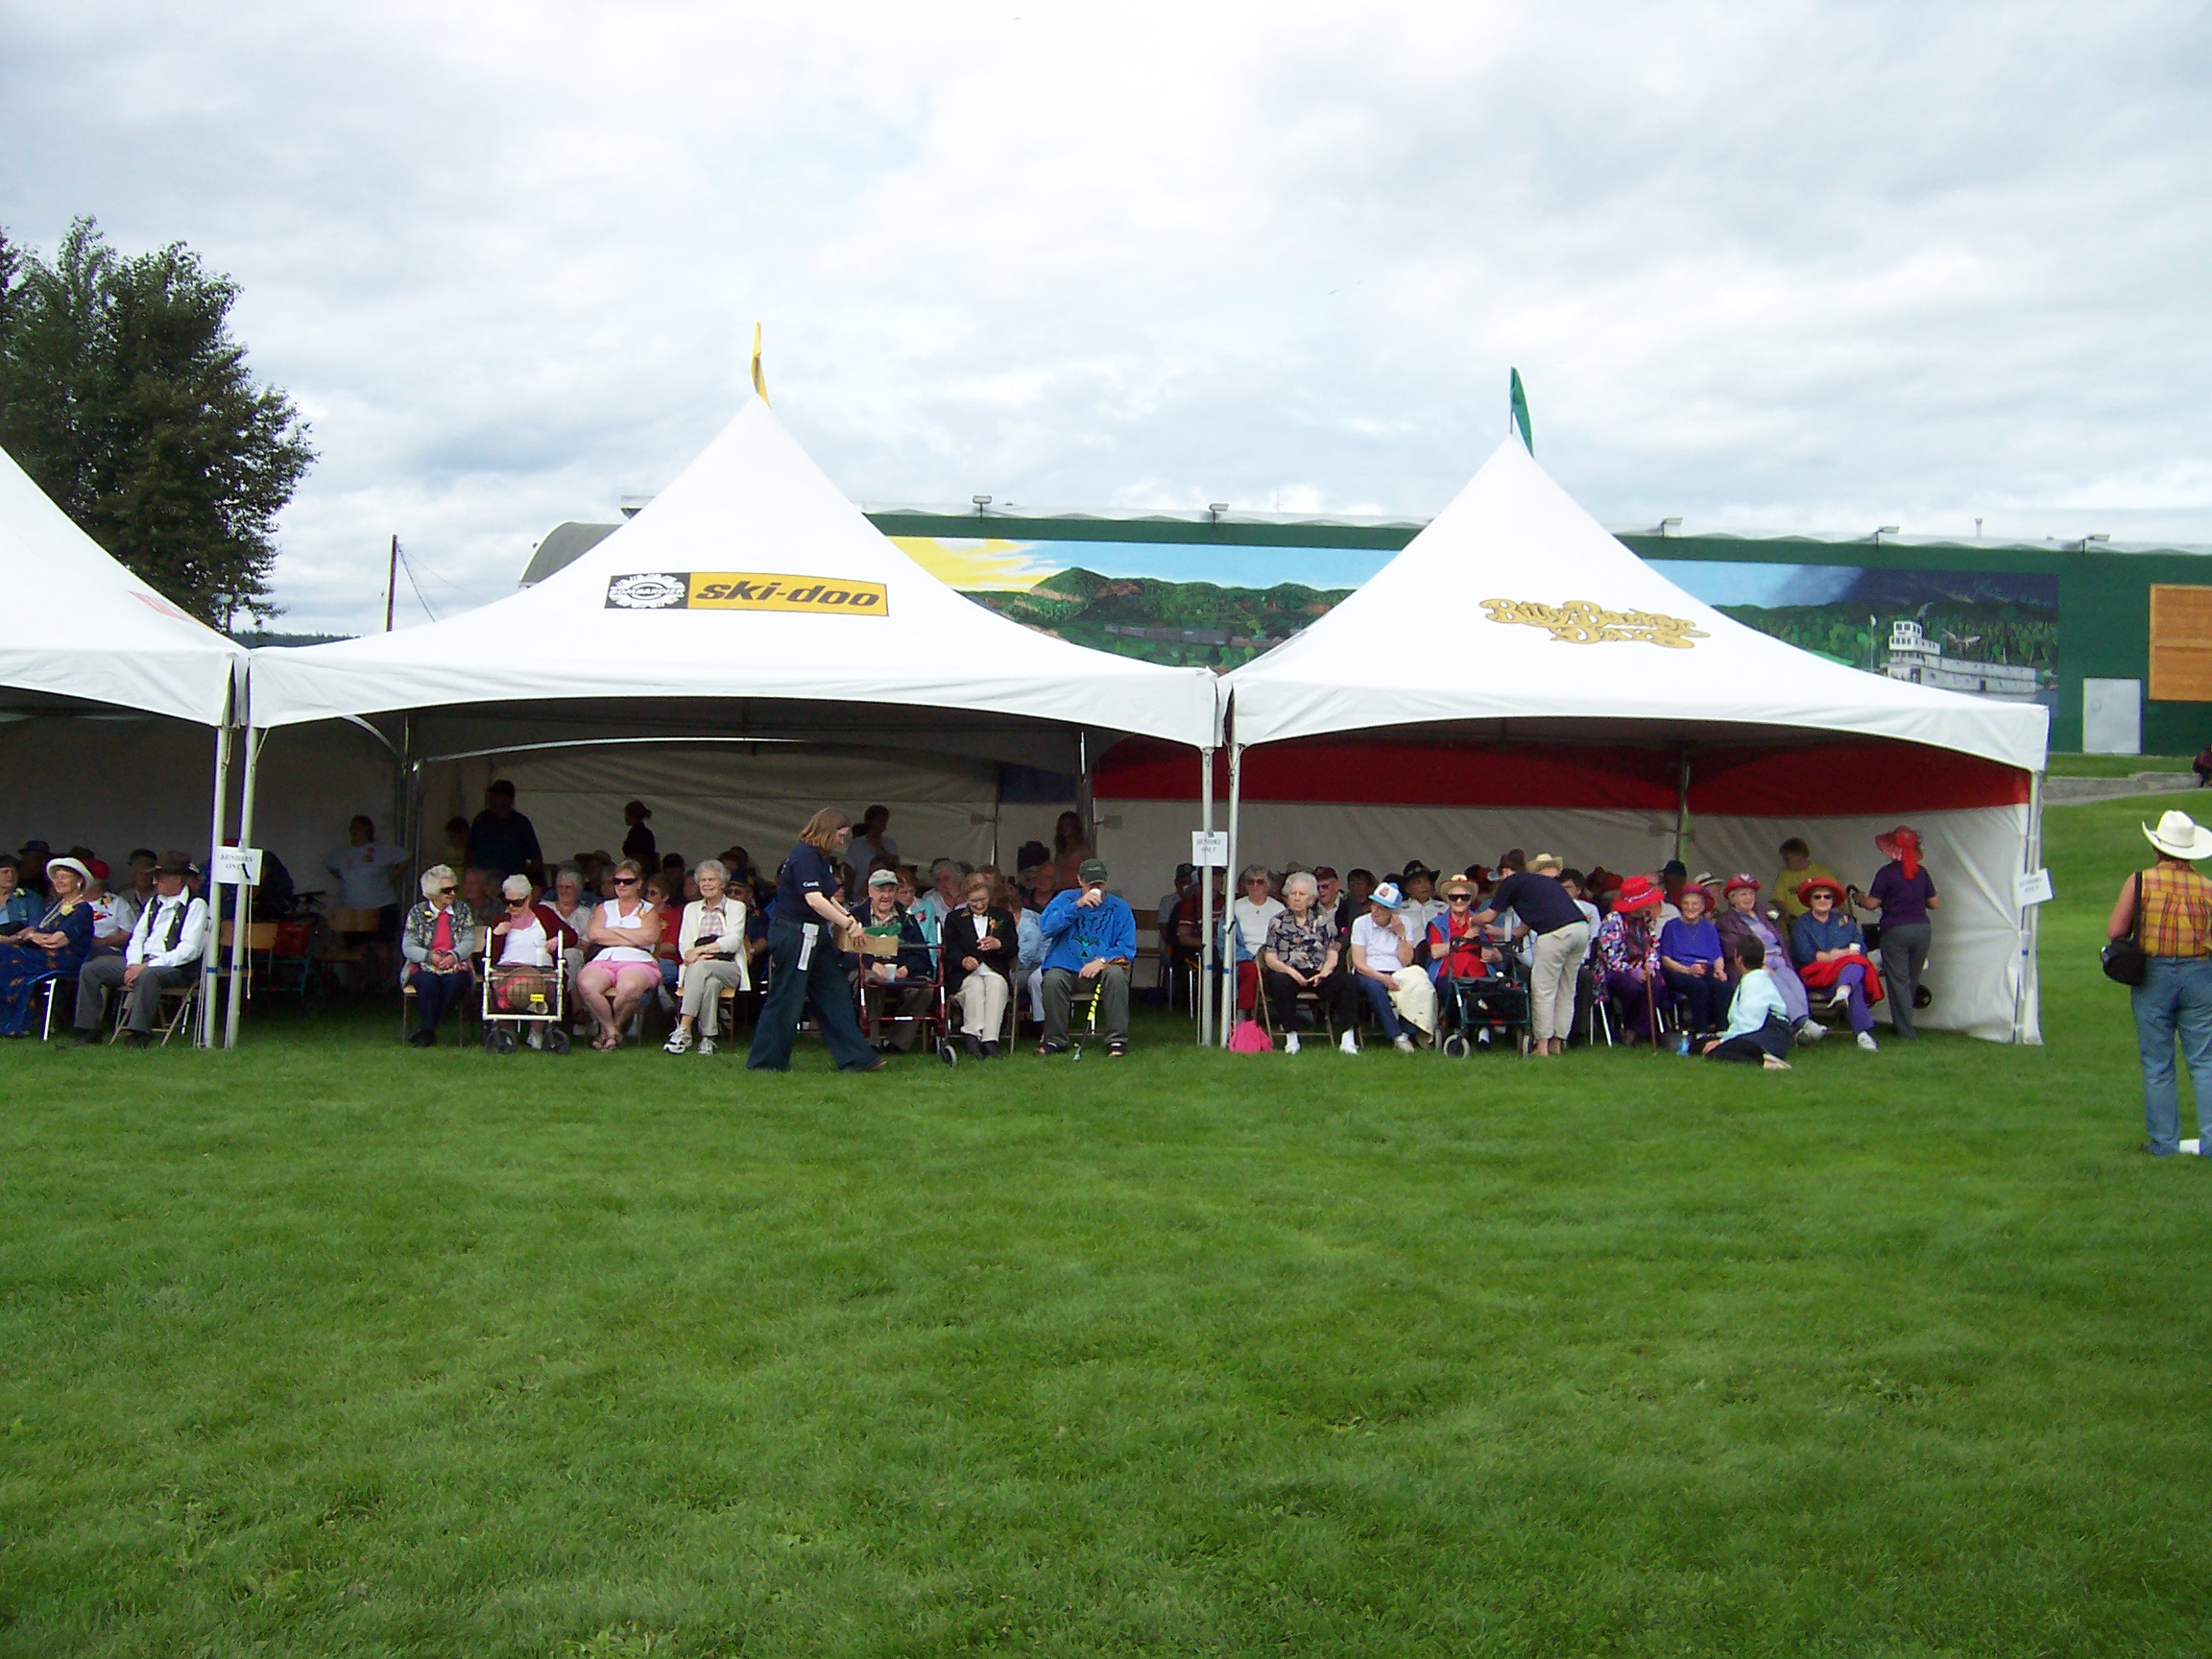 People enjoying the day in the tents at Seniors Day.